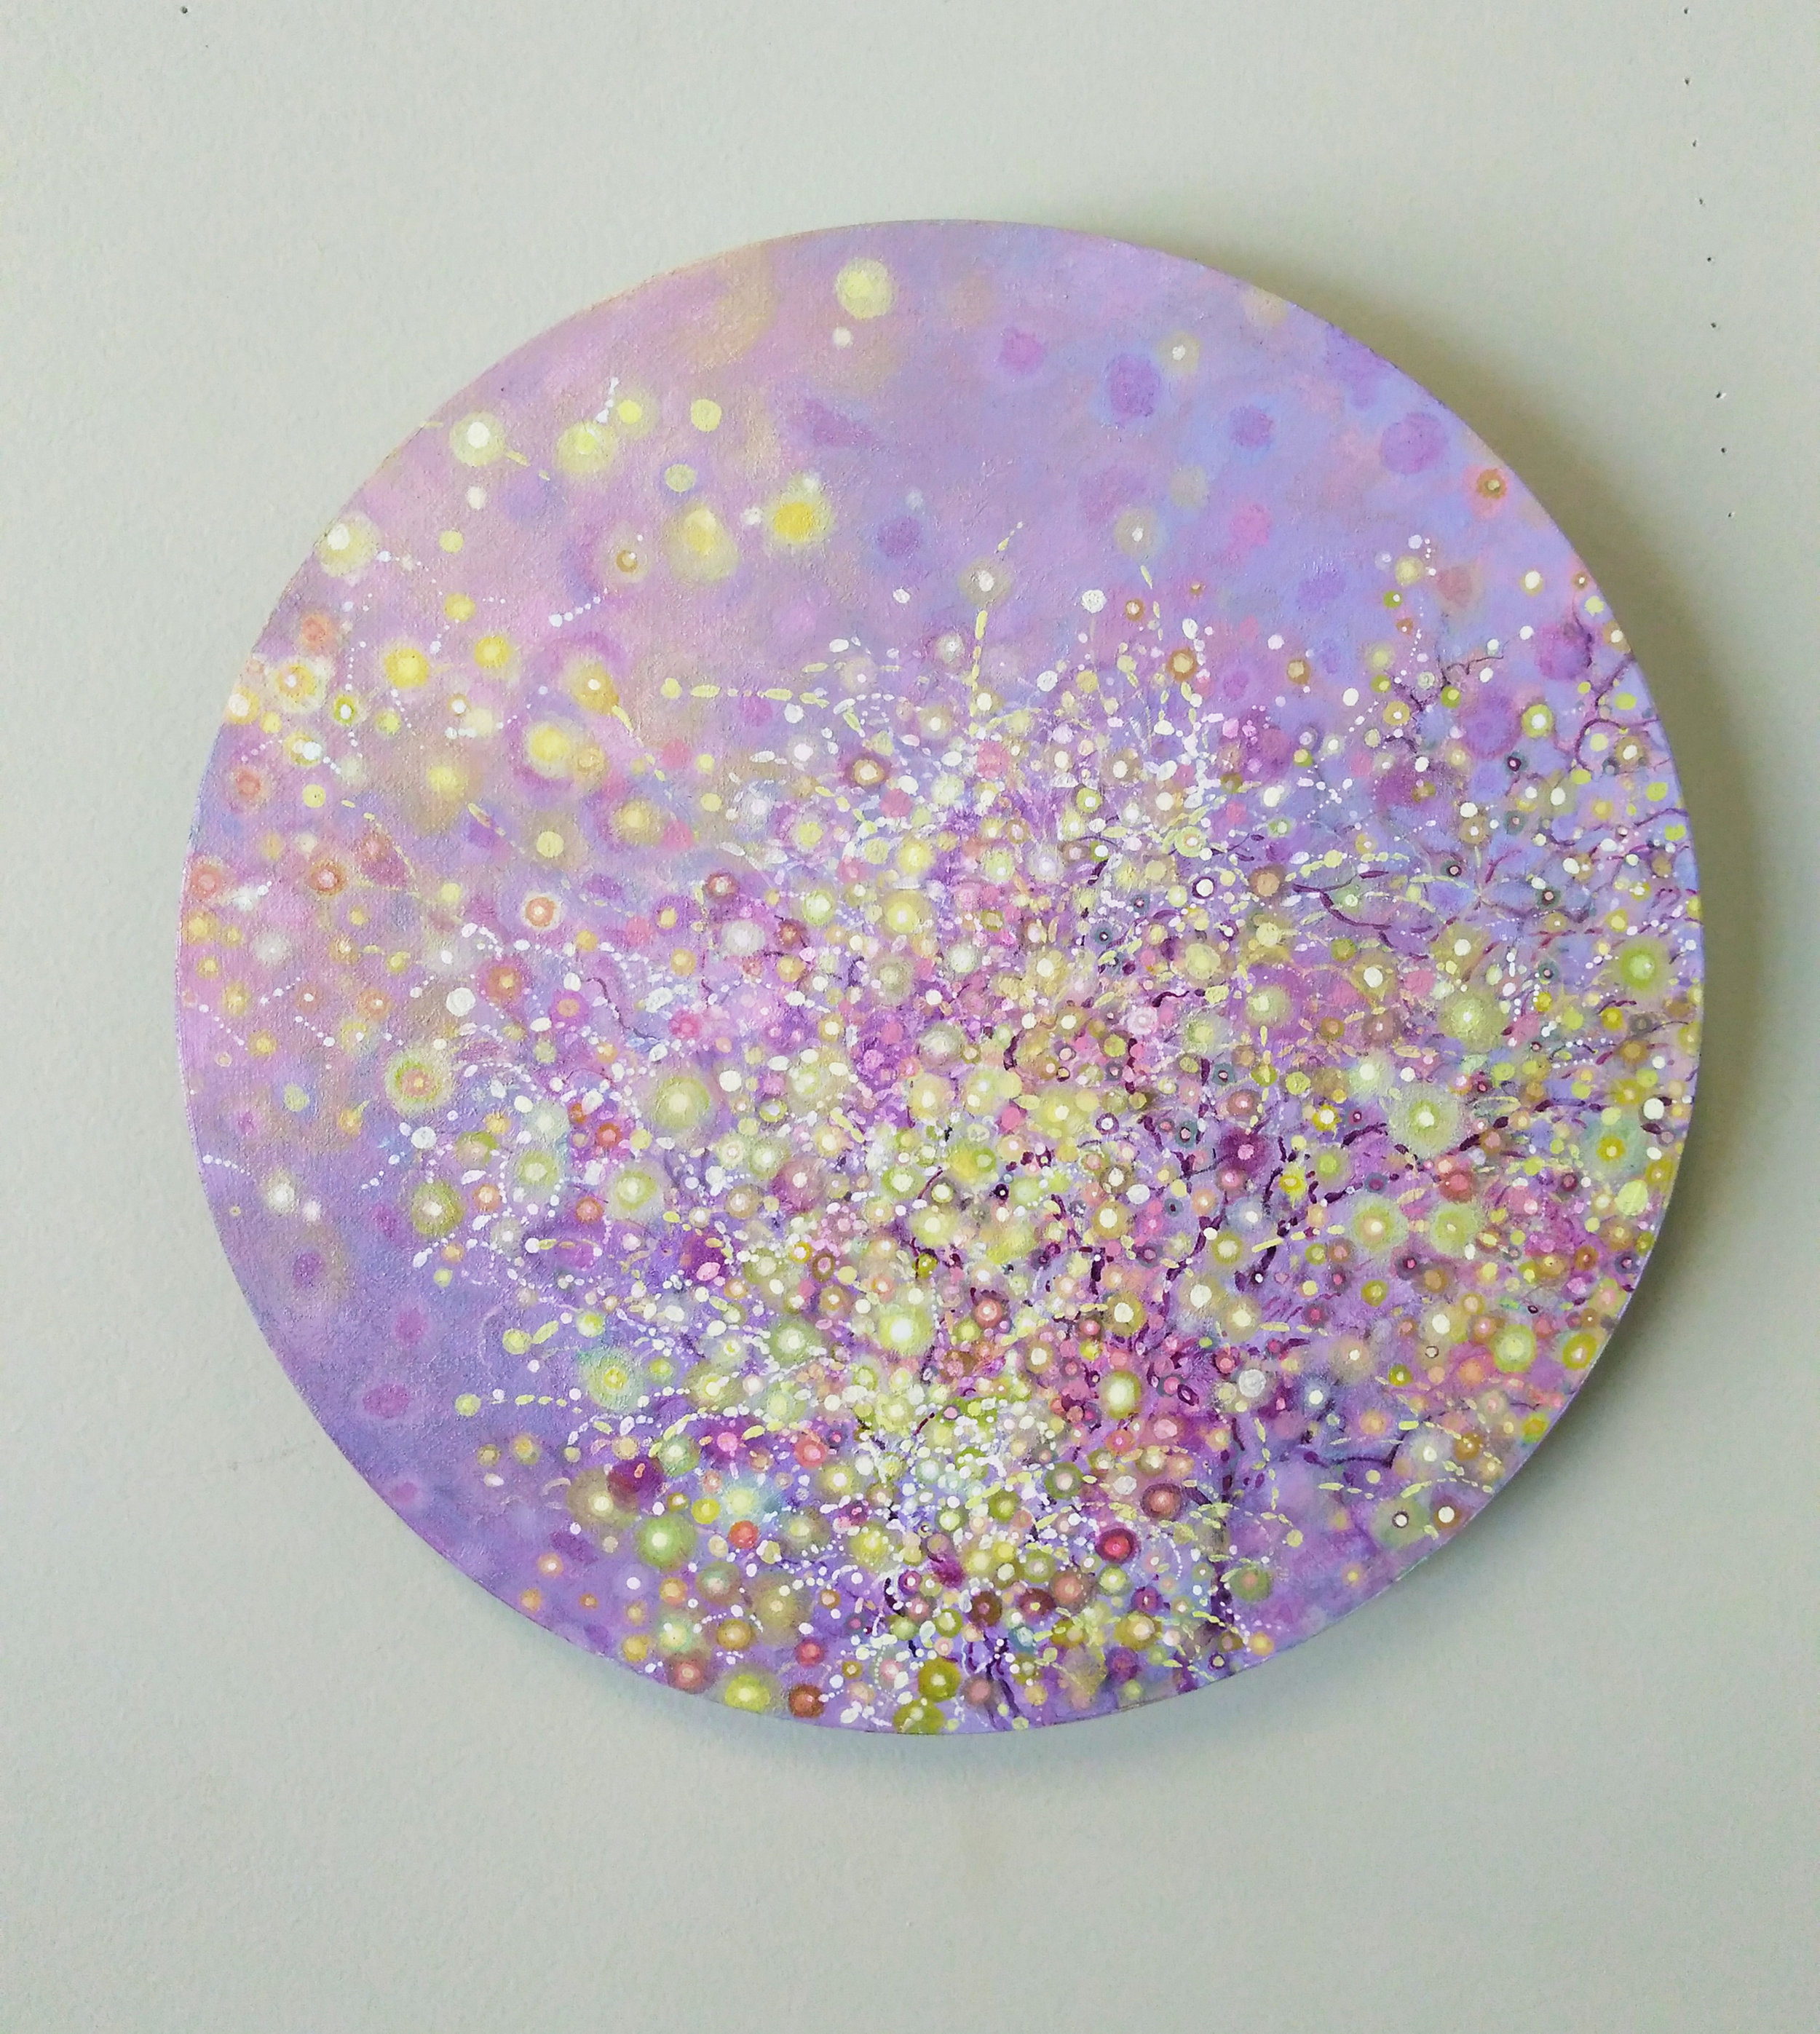  Shuling Guo  Spring 1  Acrylic on Canvas Board  Diameter: 12”  2018 